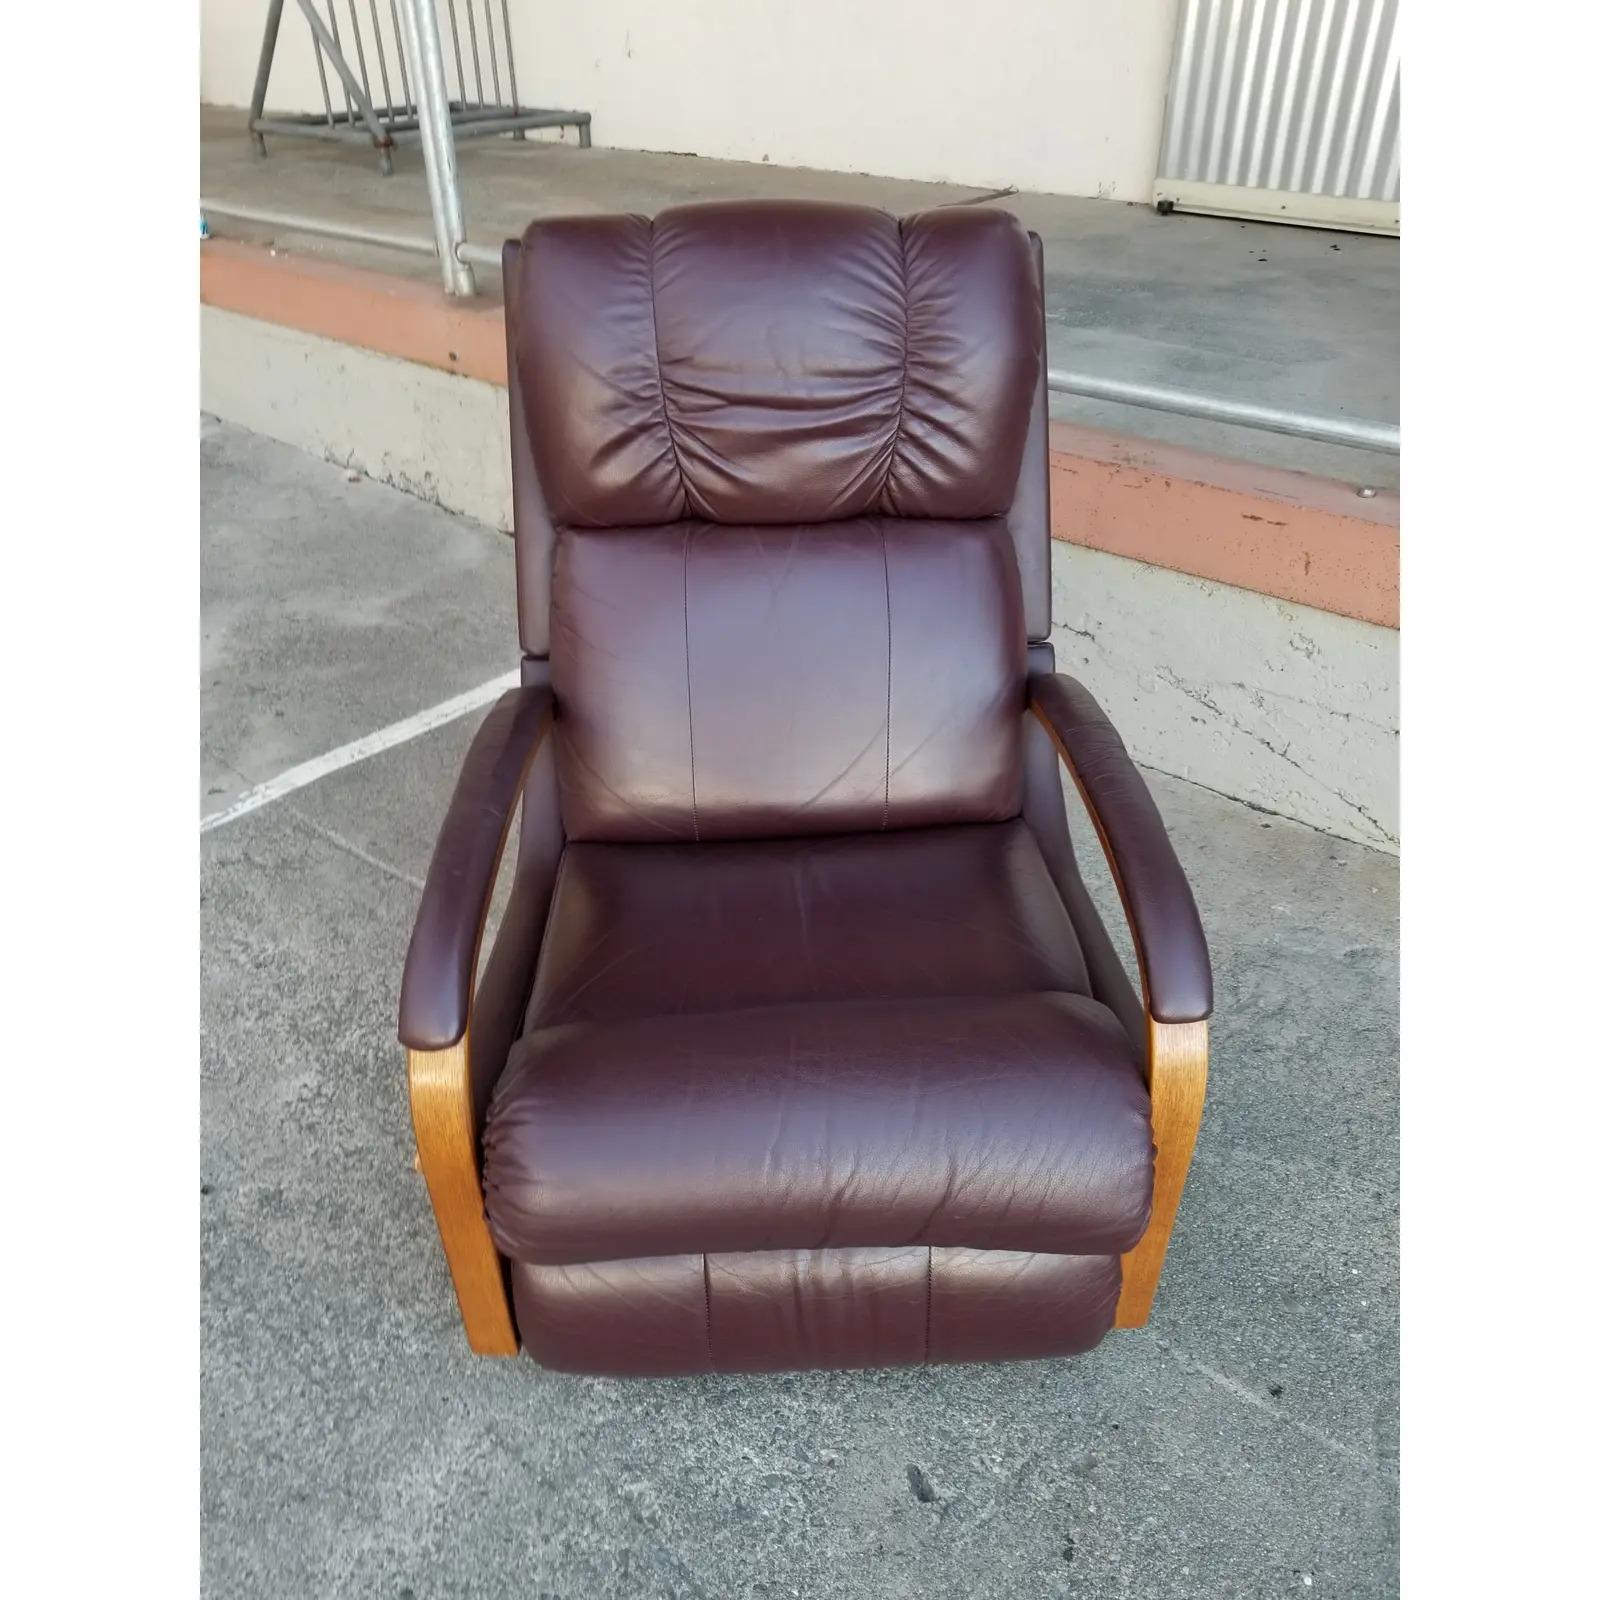 20th Century Leather Recliner by La-Z-Boy Lounge Chair